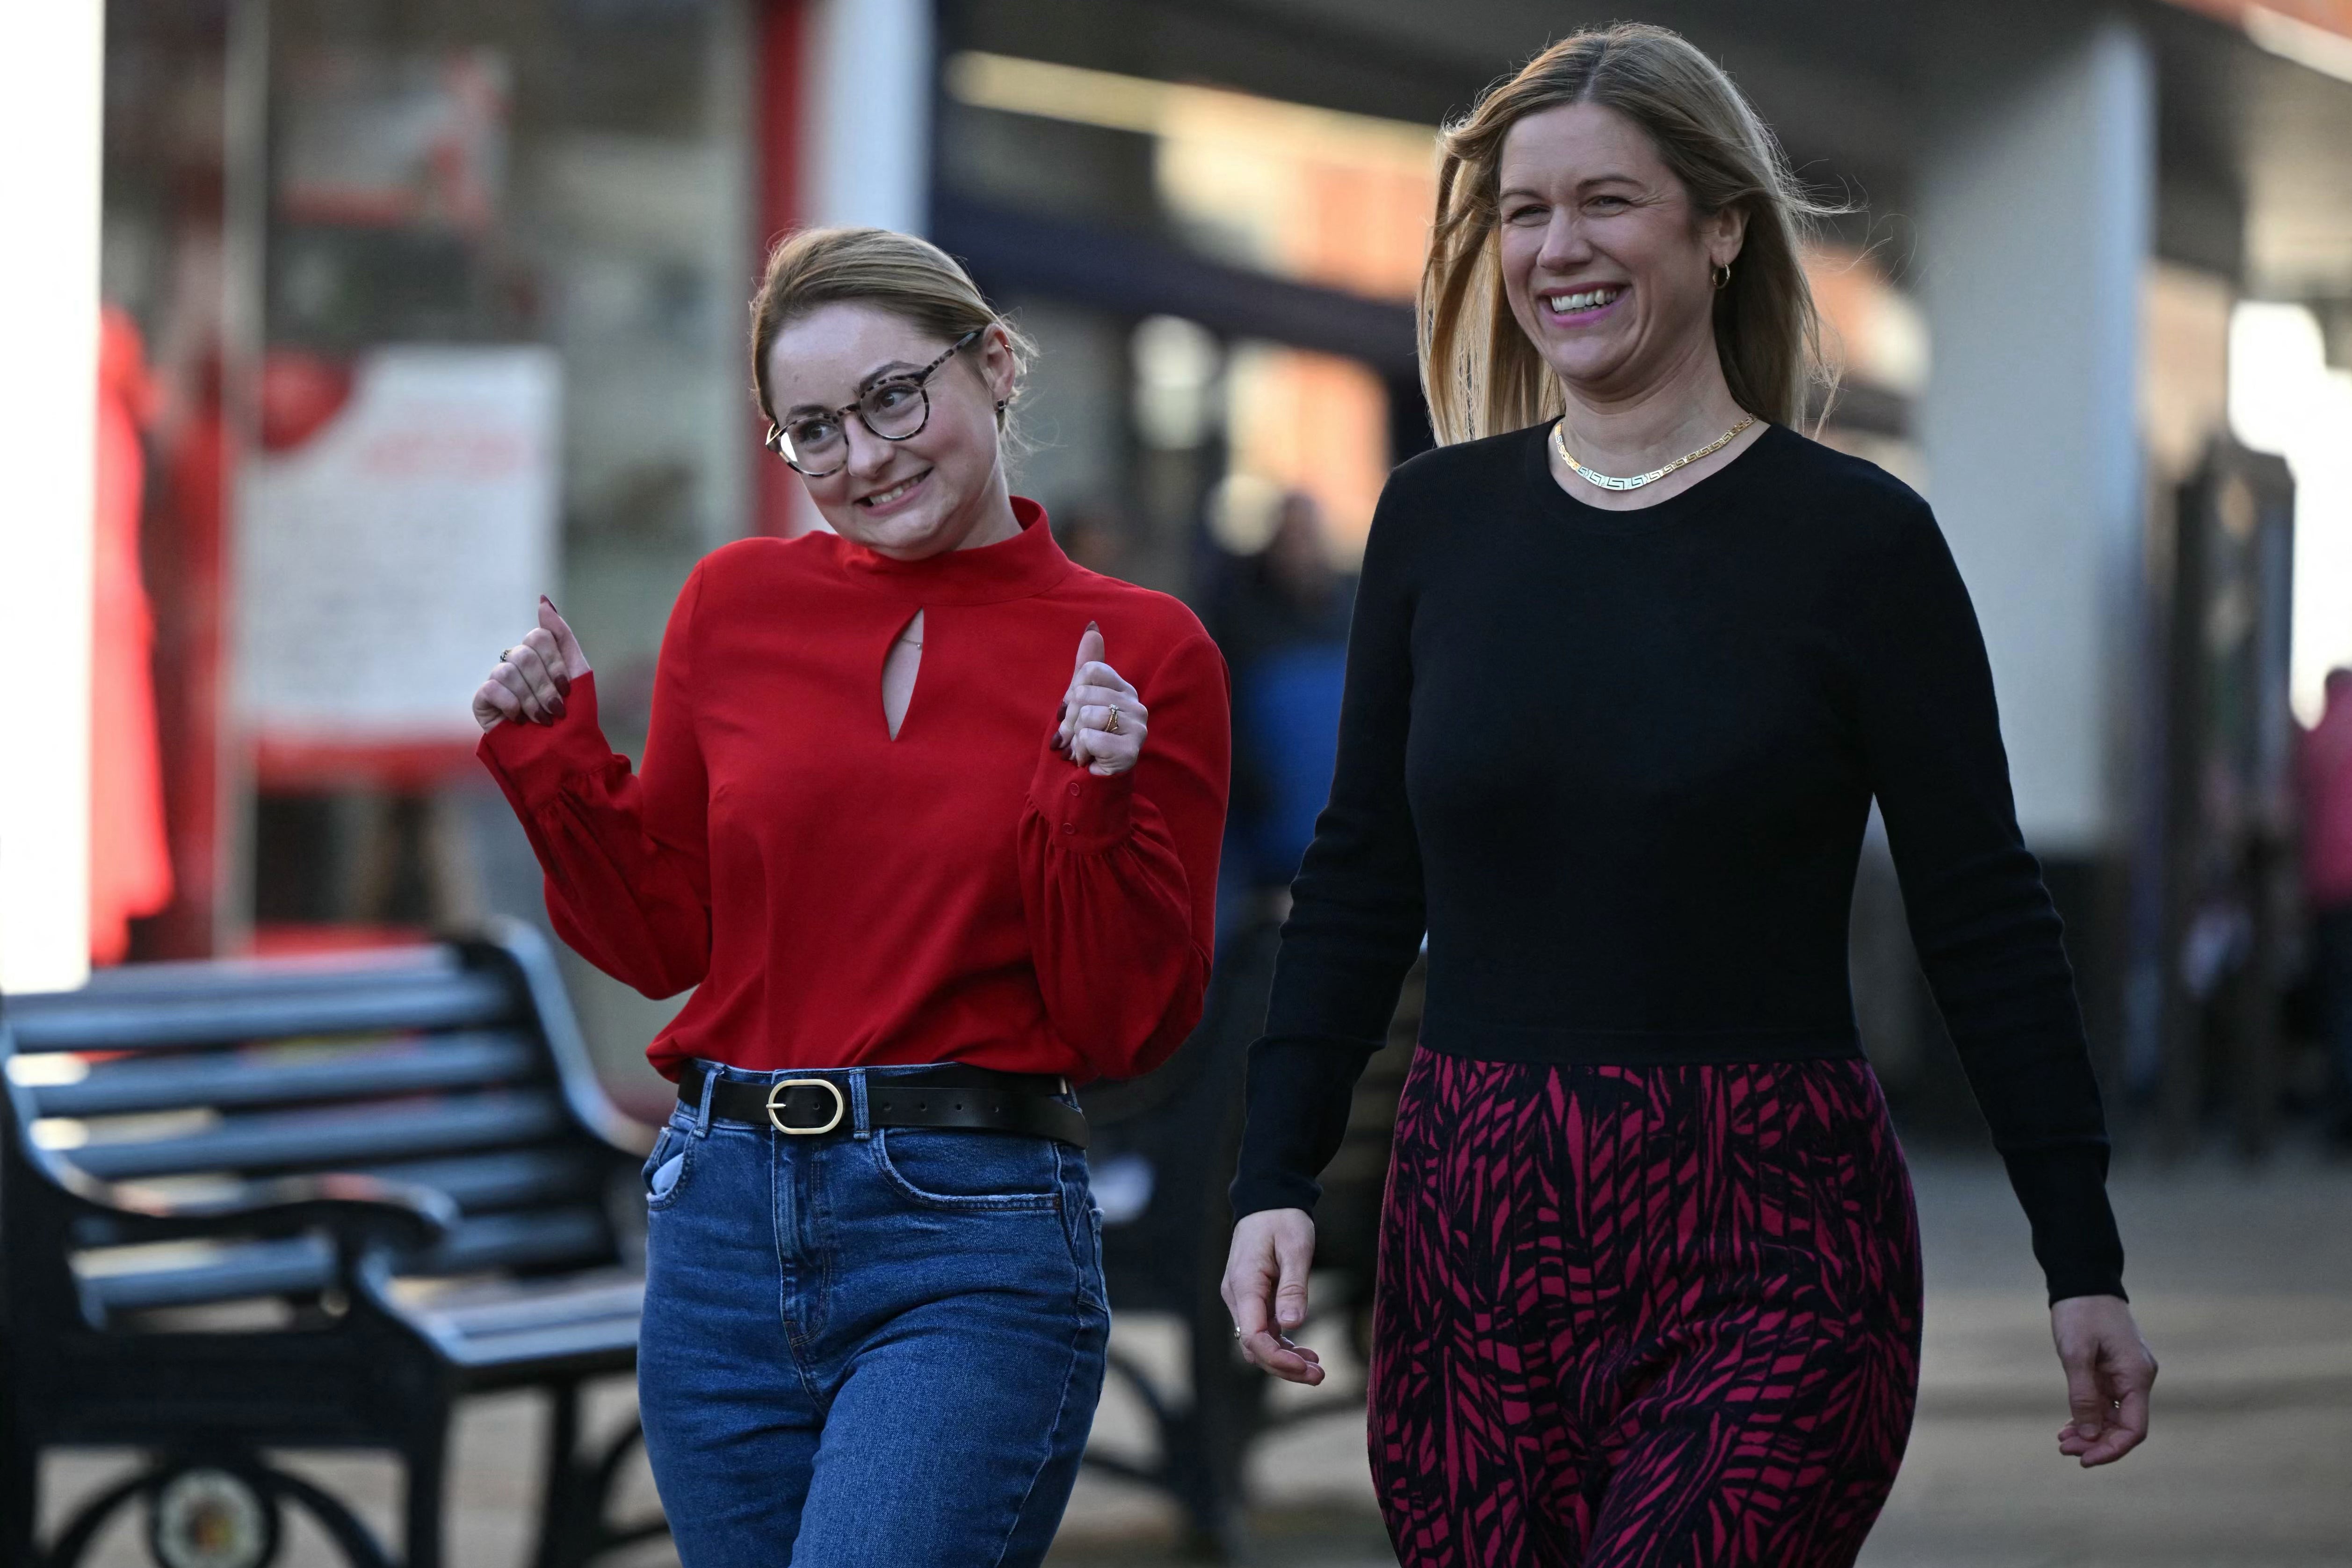 Generation X-in-the-box: Gen Kitchen (left), the new 28-year-old Wellingborough MP, with campaign coordinator Ellie Reeves, after Labour’s by-election win